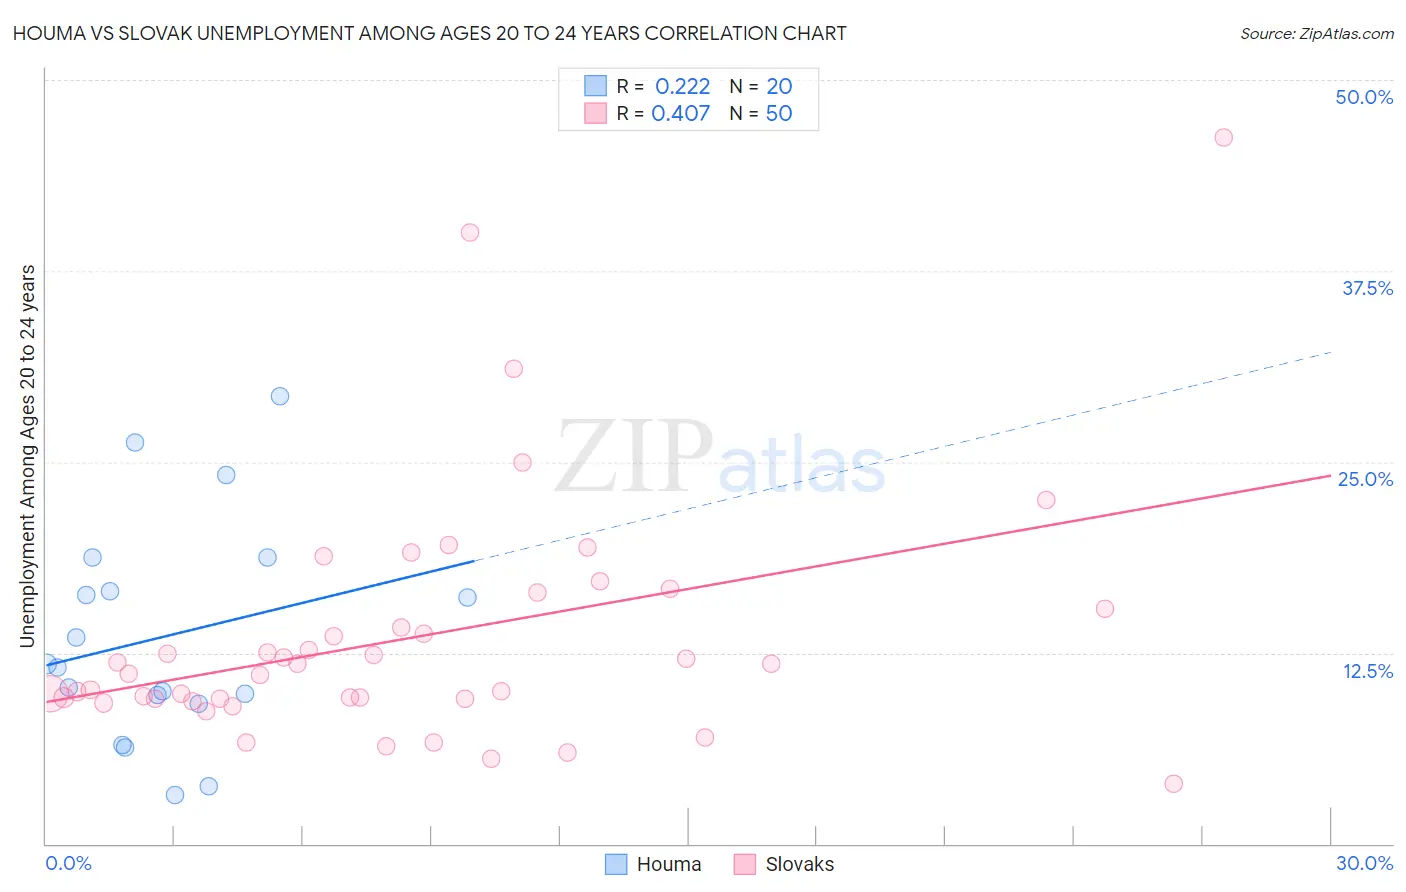 Houma vs Slovak Unemployment Among Ages 20 to 24 years